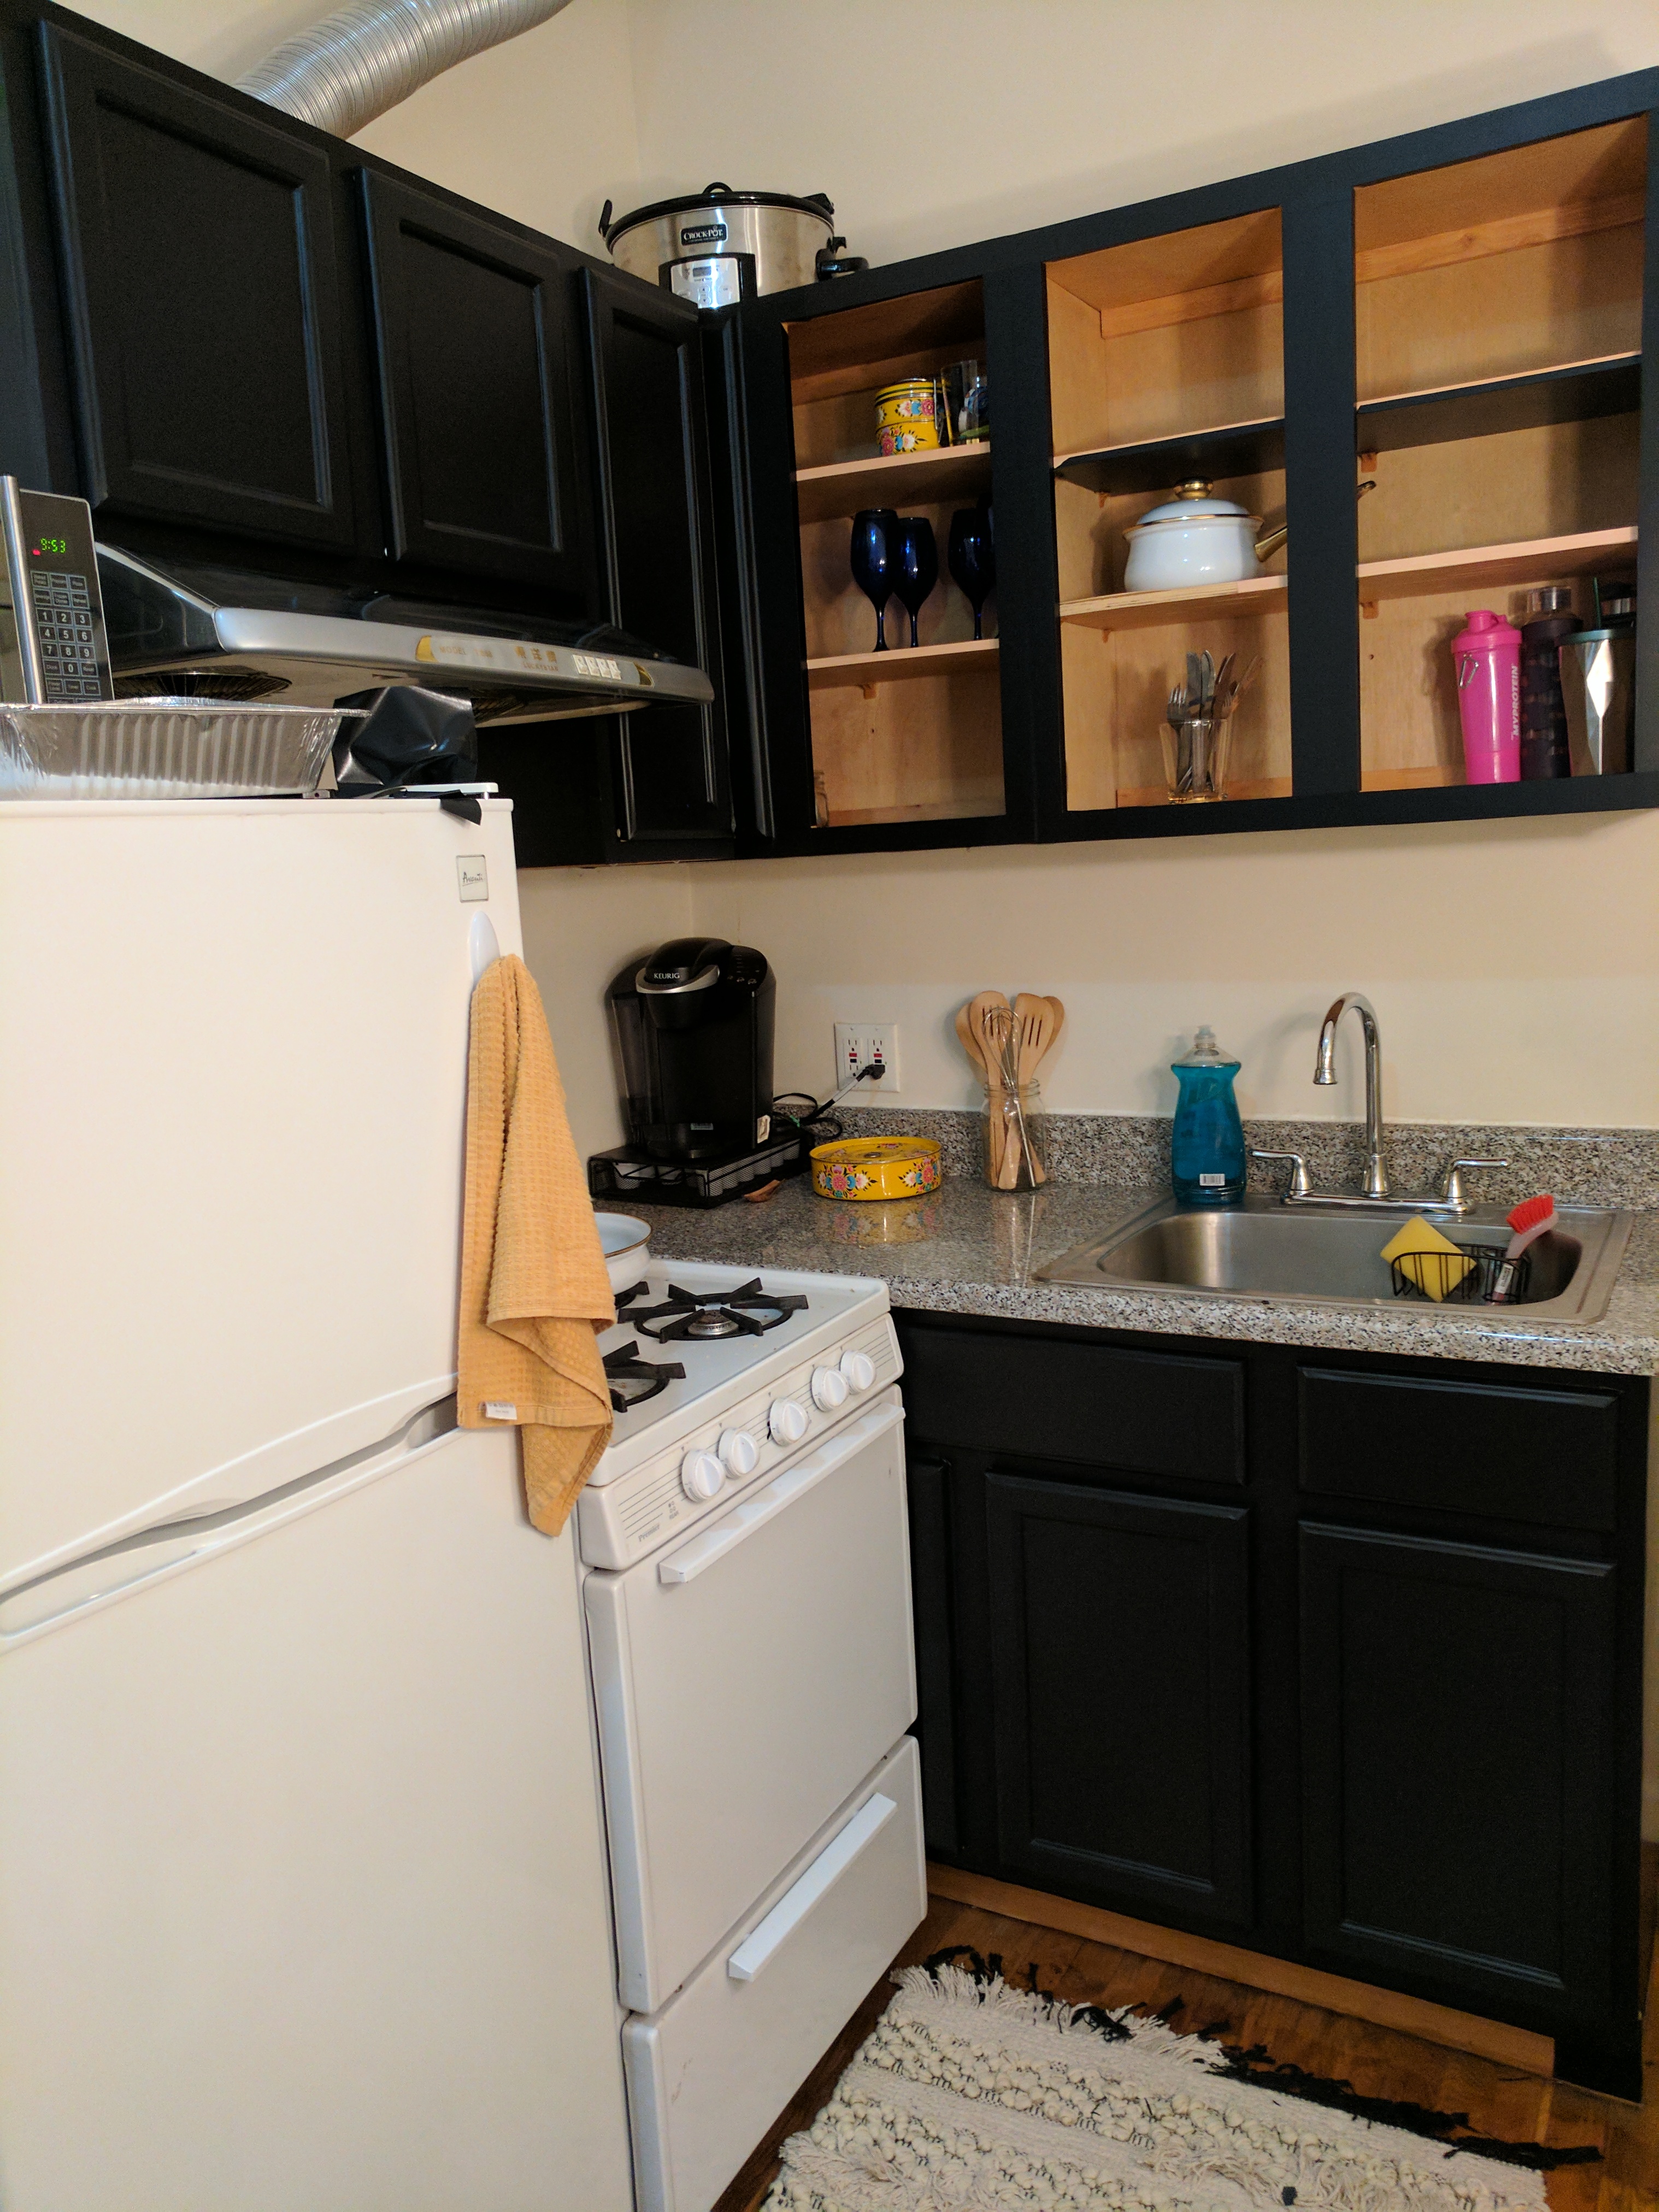 Diy Contact Paper Kitchen Update Part 1 Cabinets Roaming Home